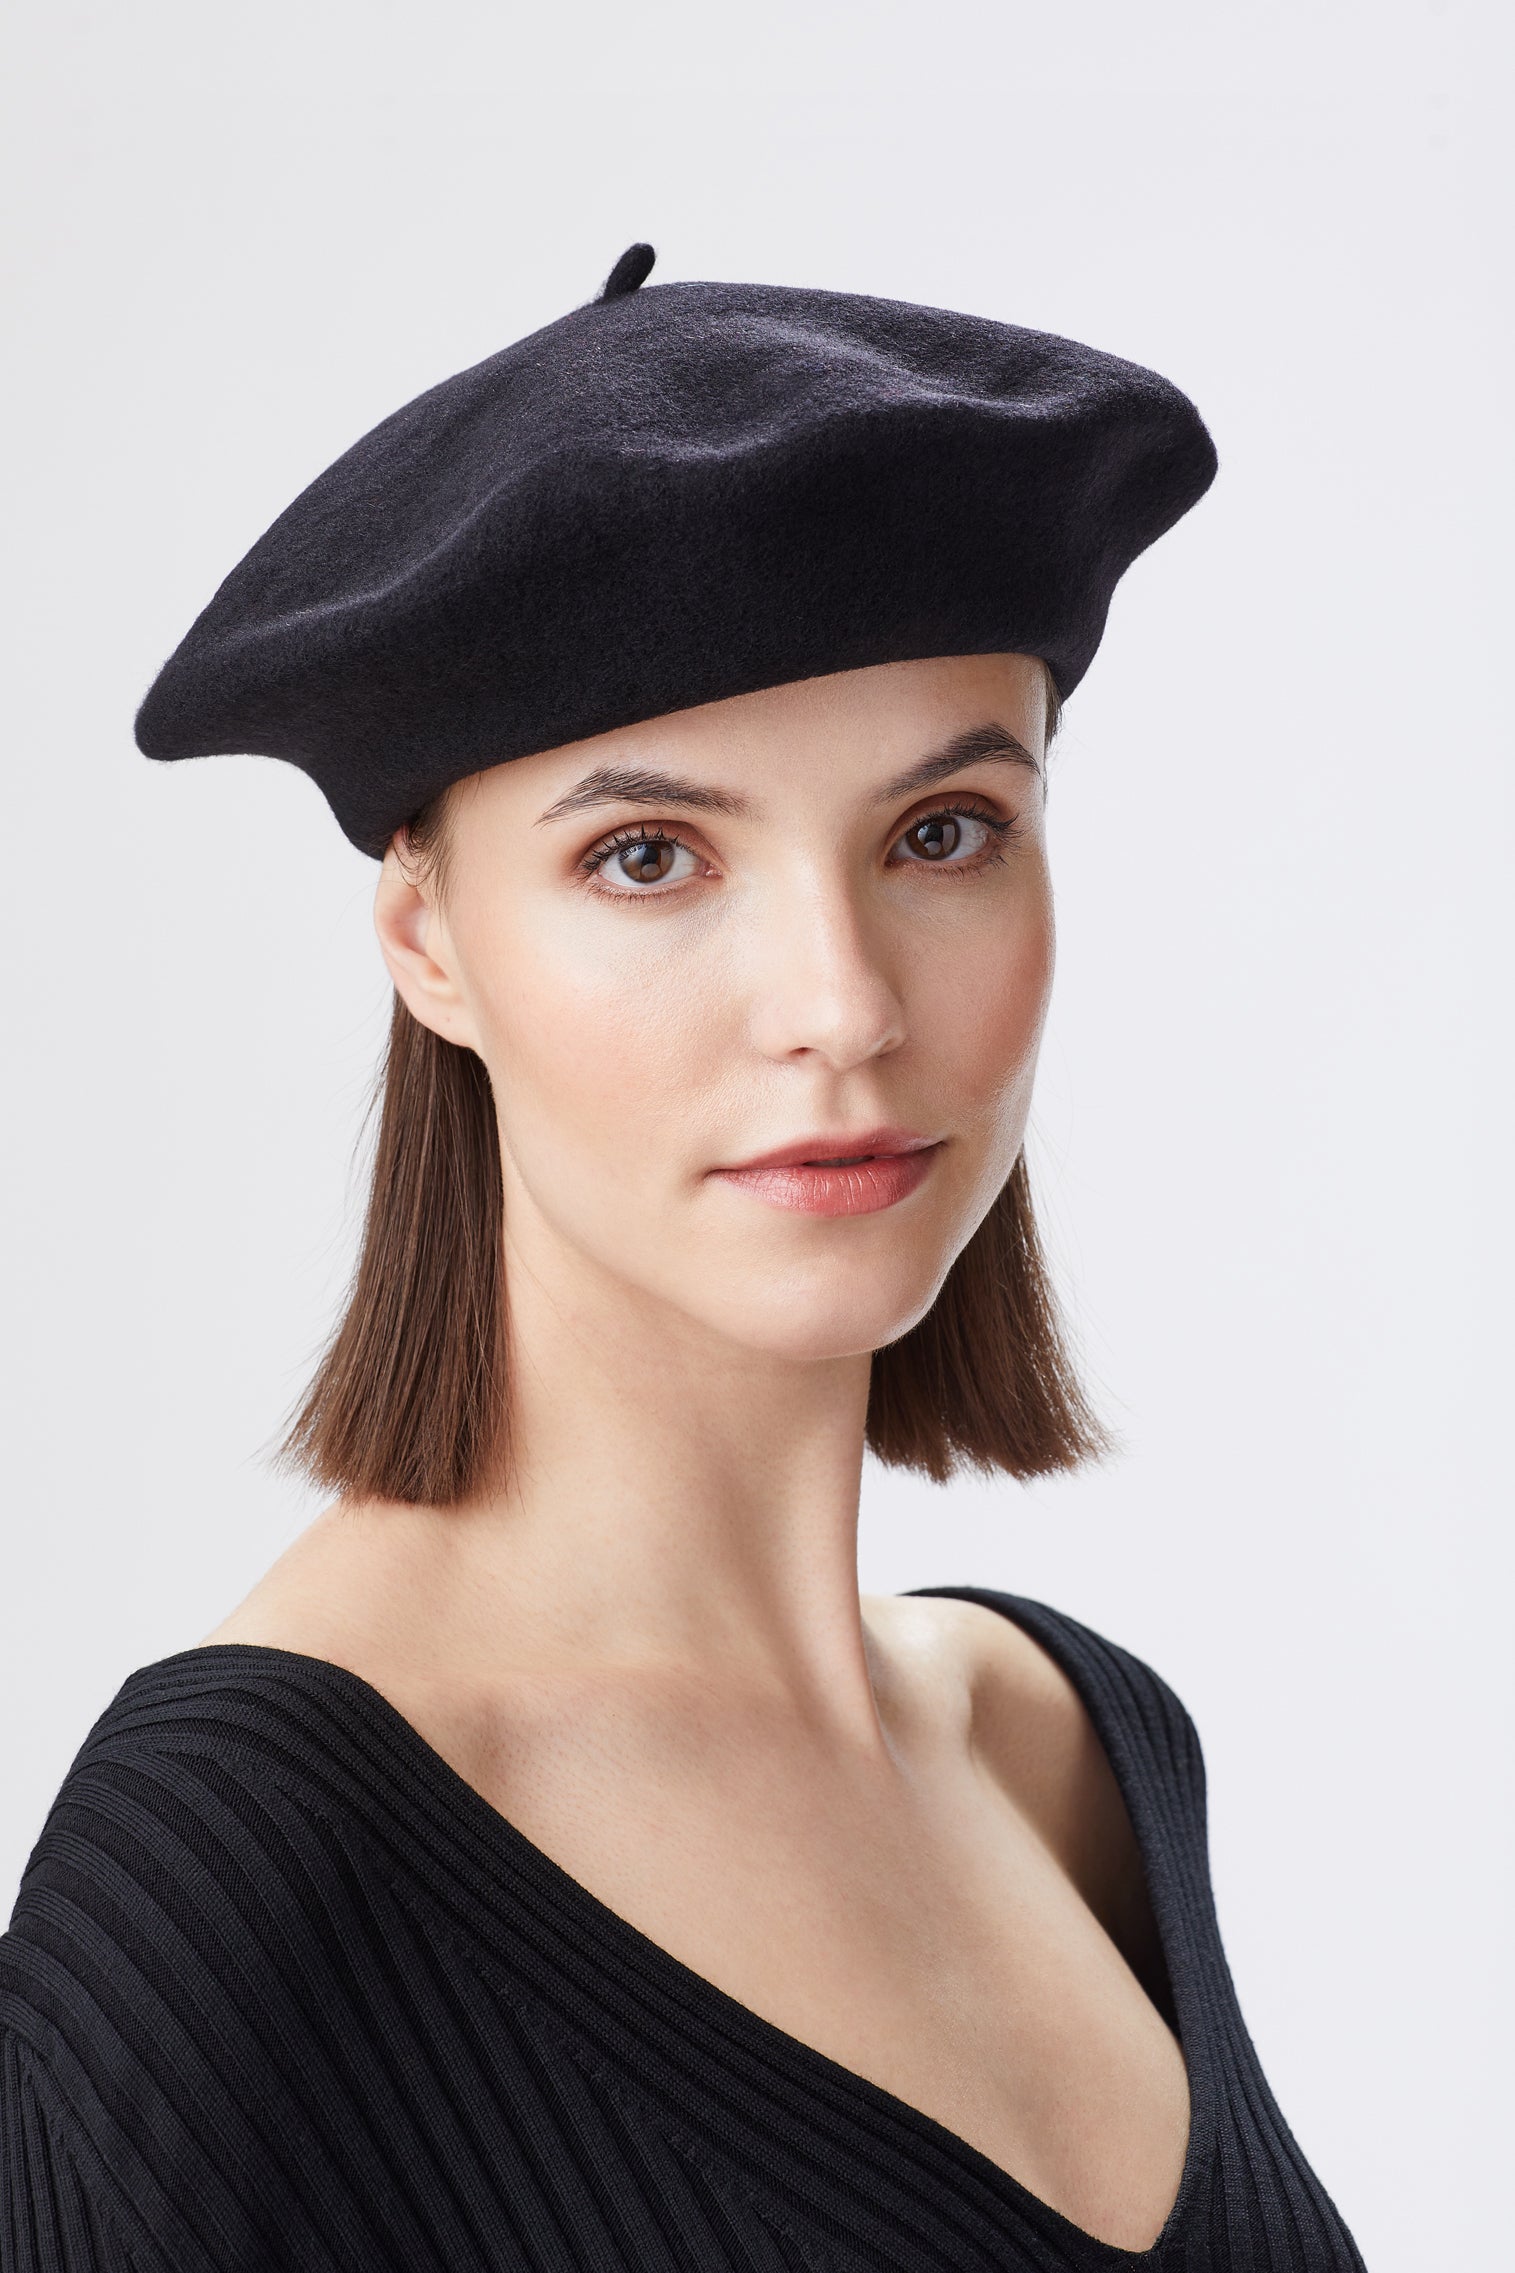 French Beret - Hats for Round Face Shapes - Lock & Co. Hatters London UK